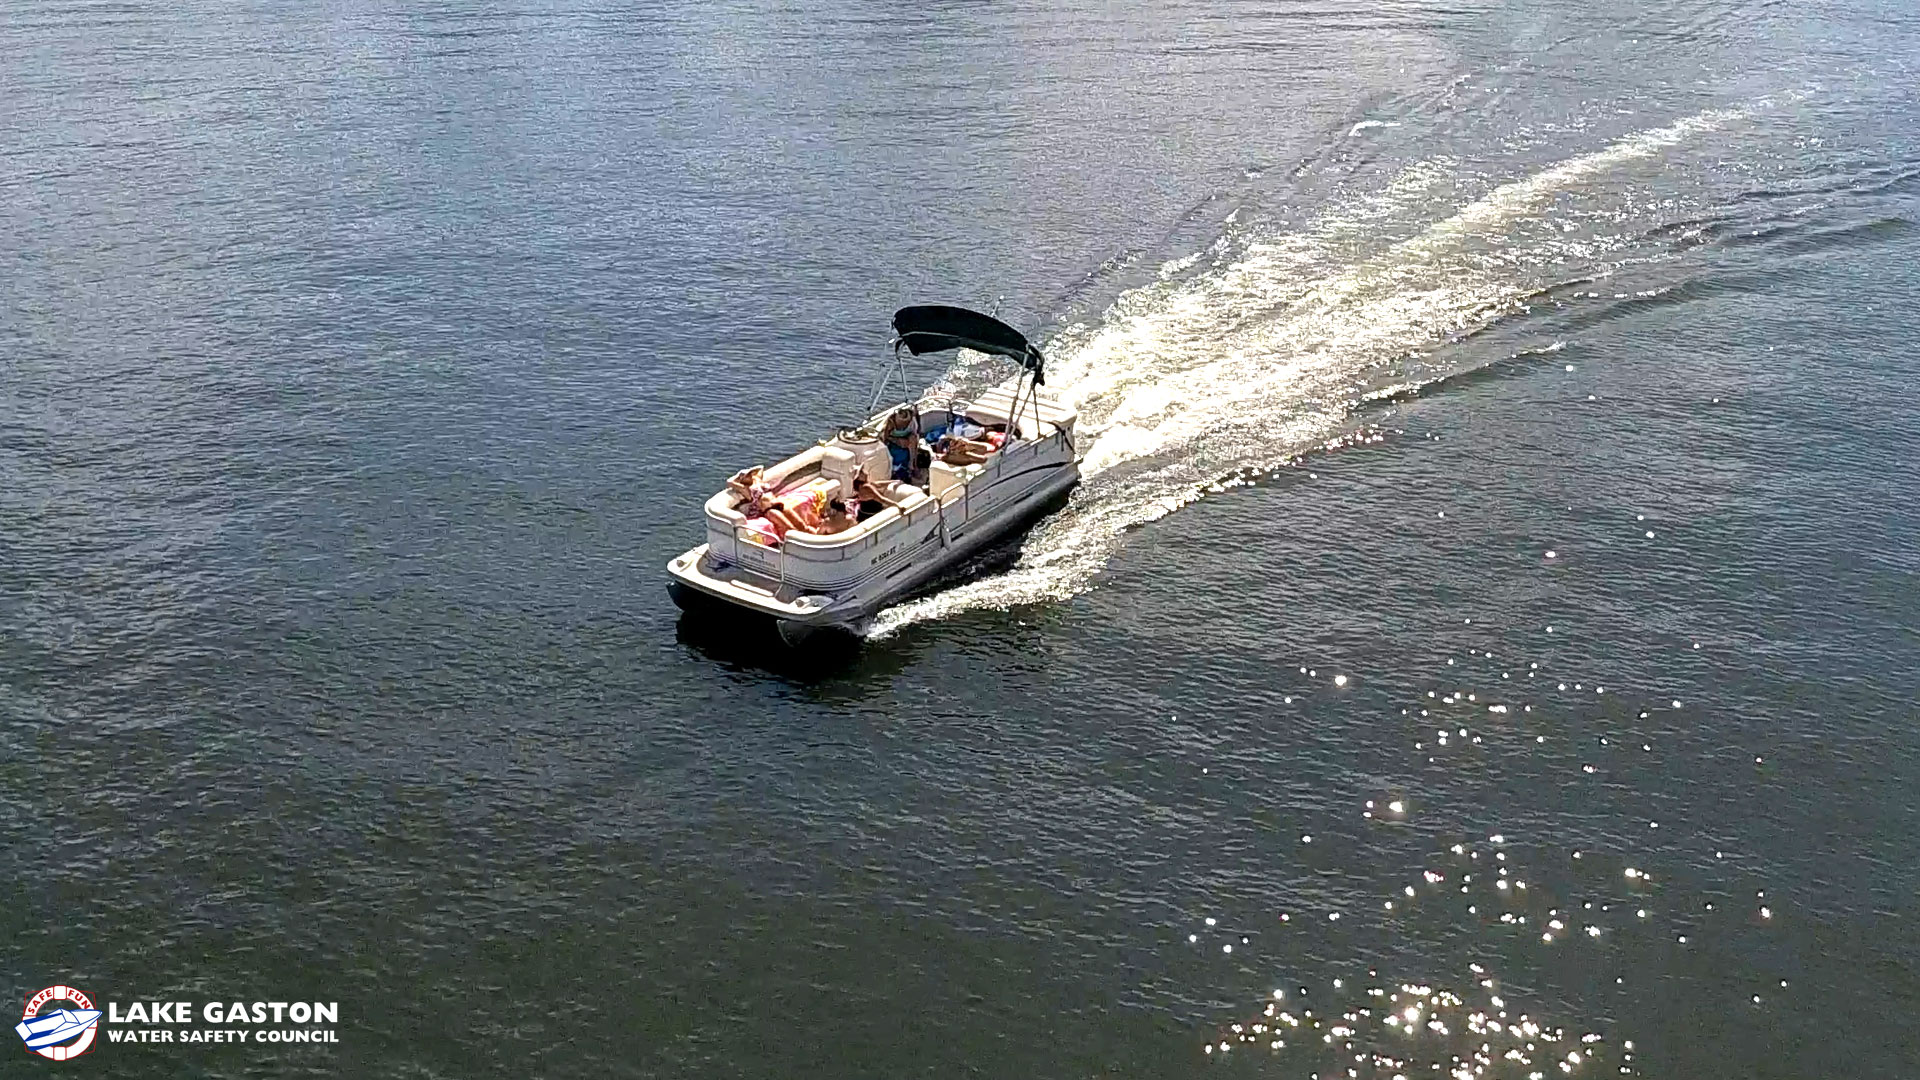 Lake Gaston Boating Safety Inspections and BLUE LIGHT LAW